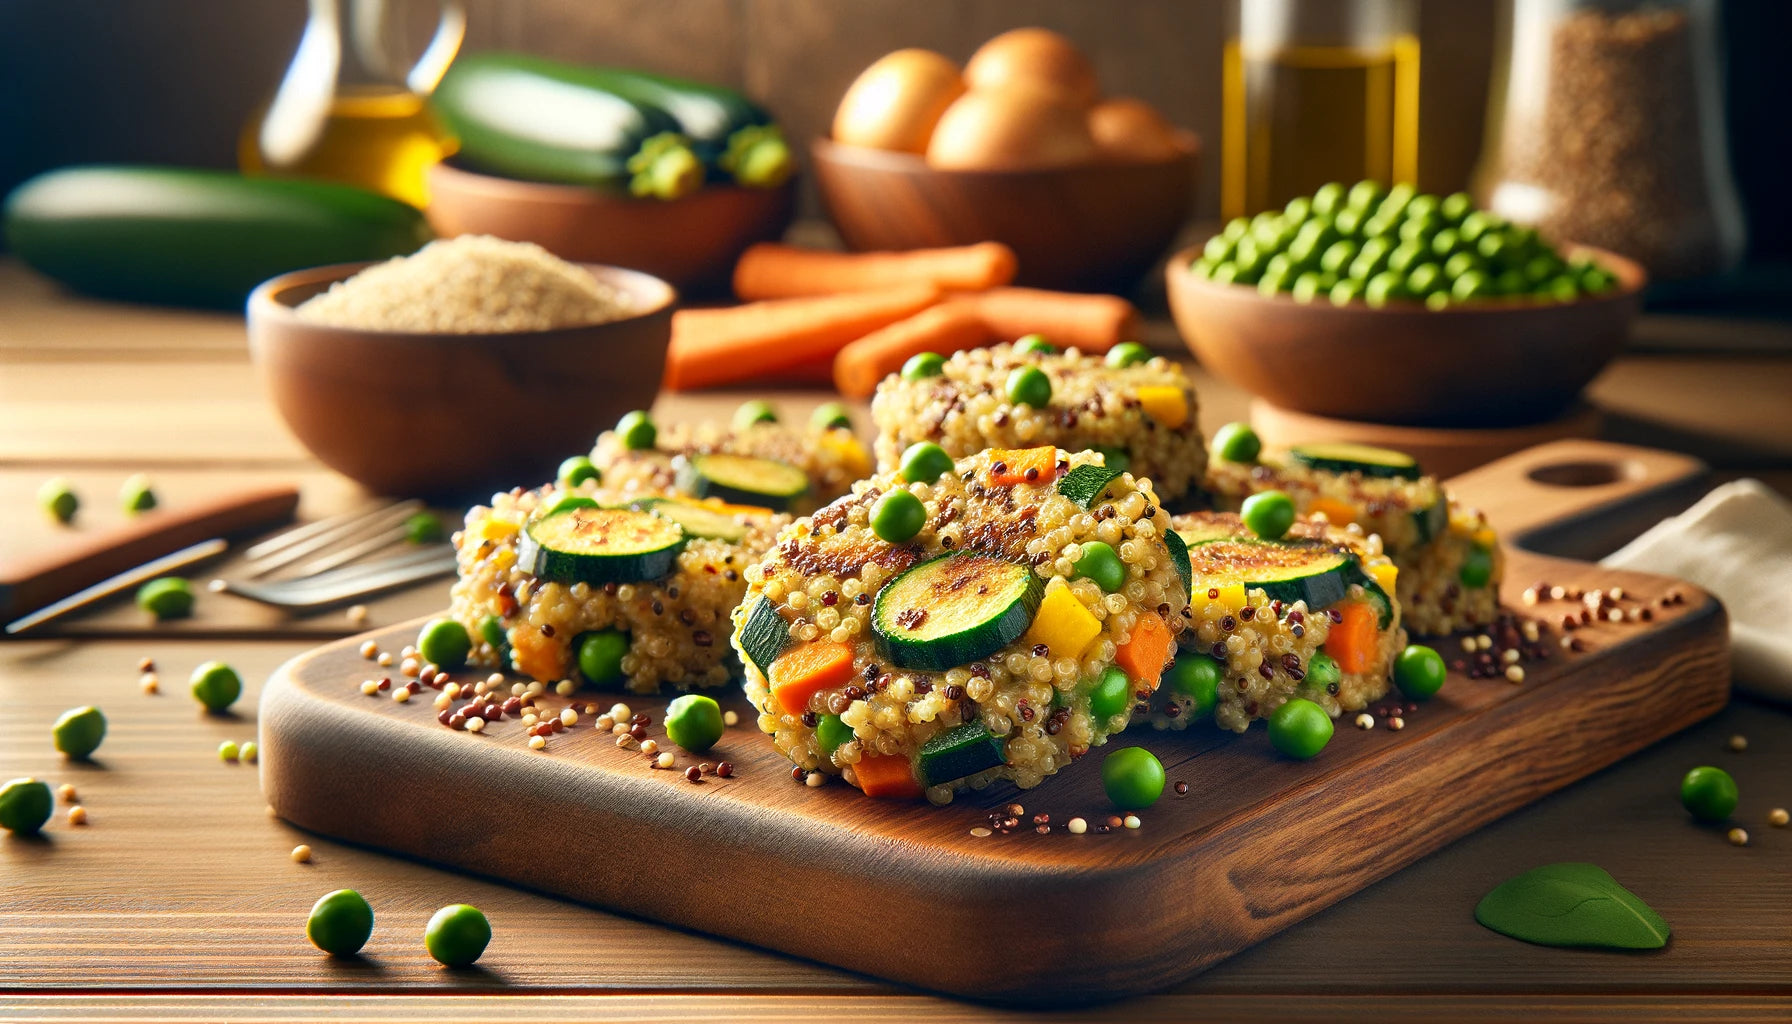 Quinoa Veggie Patties showcasing a vibrant and nutritious meal option for dogs.